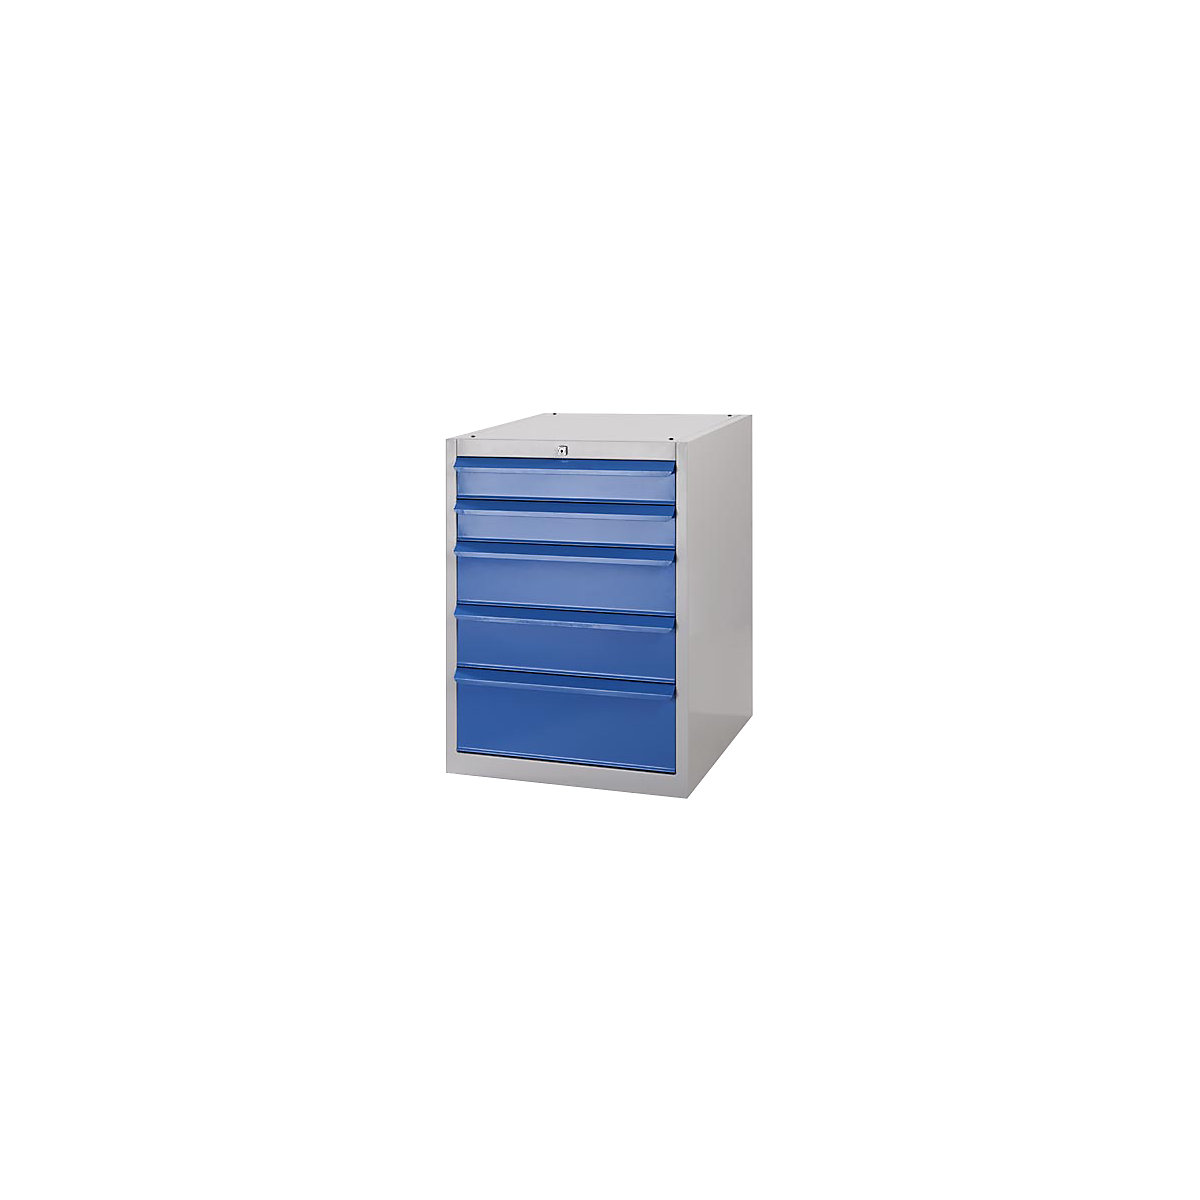 Drawer cupboard, WxD 600 x 600 mm, height 800 mm, 5 drawers, light grey / light blue-11